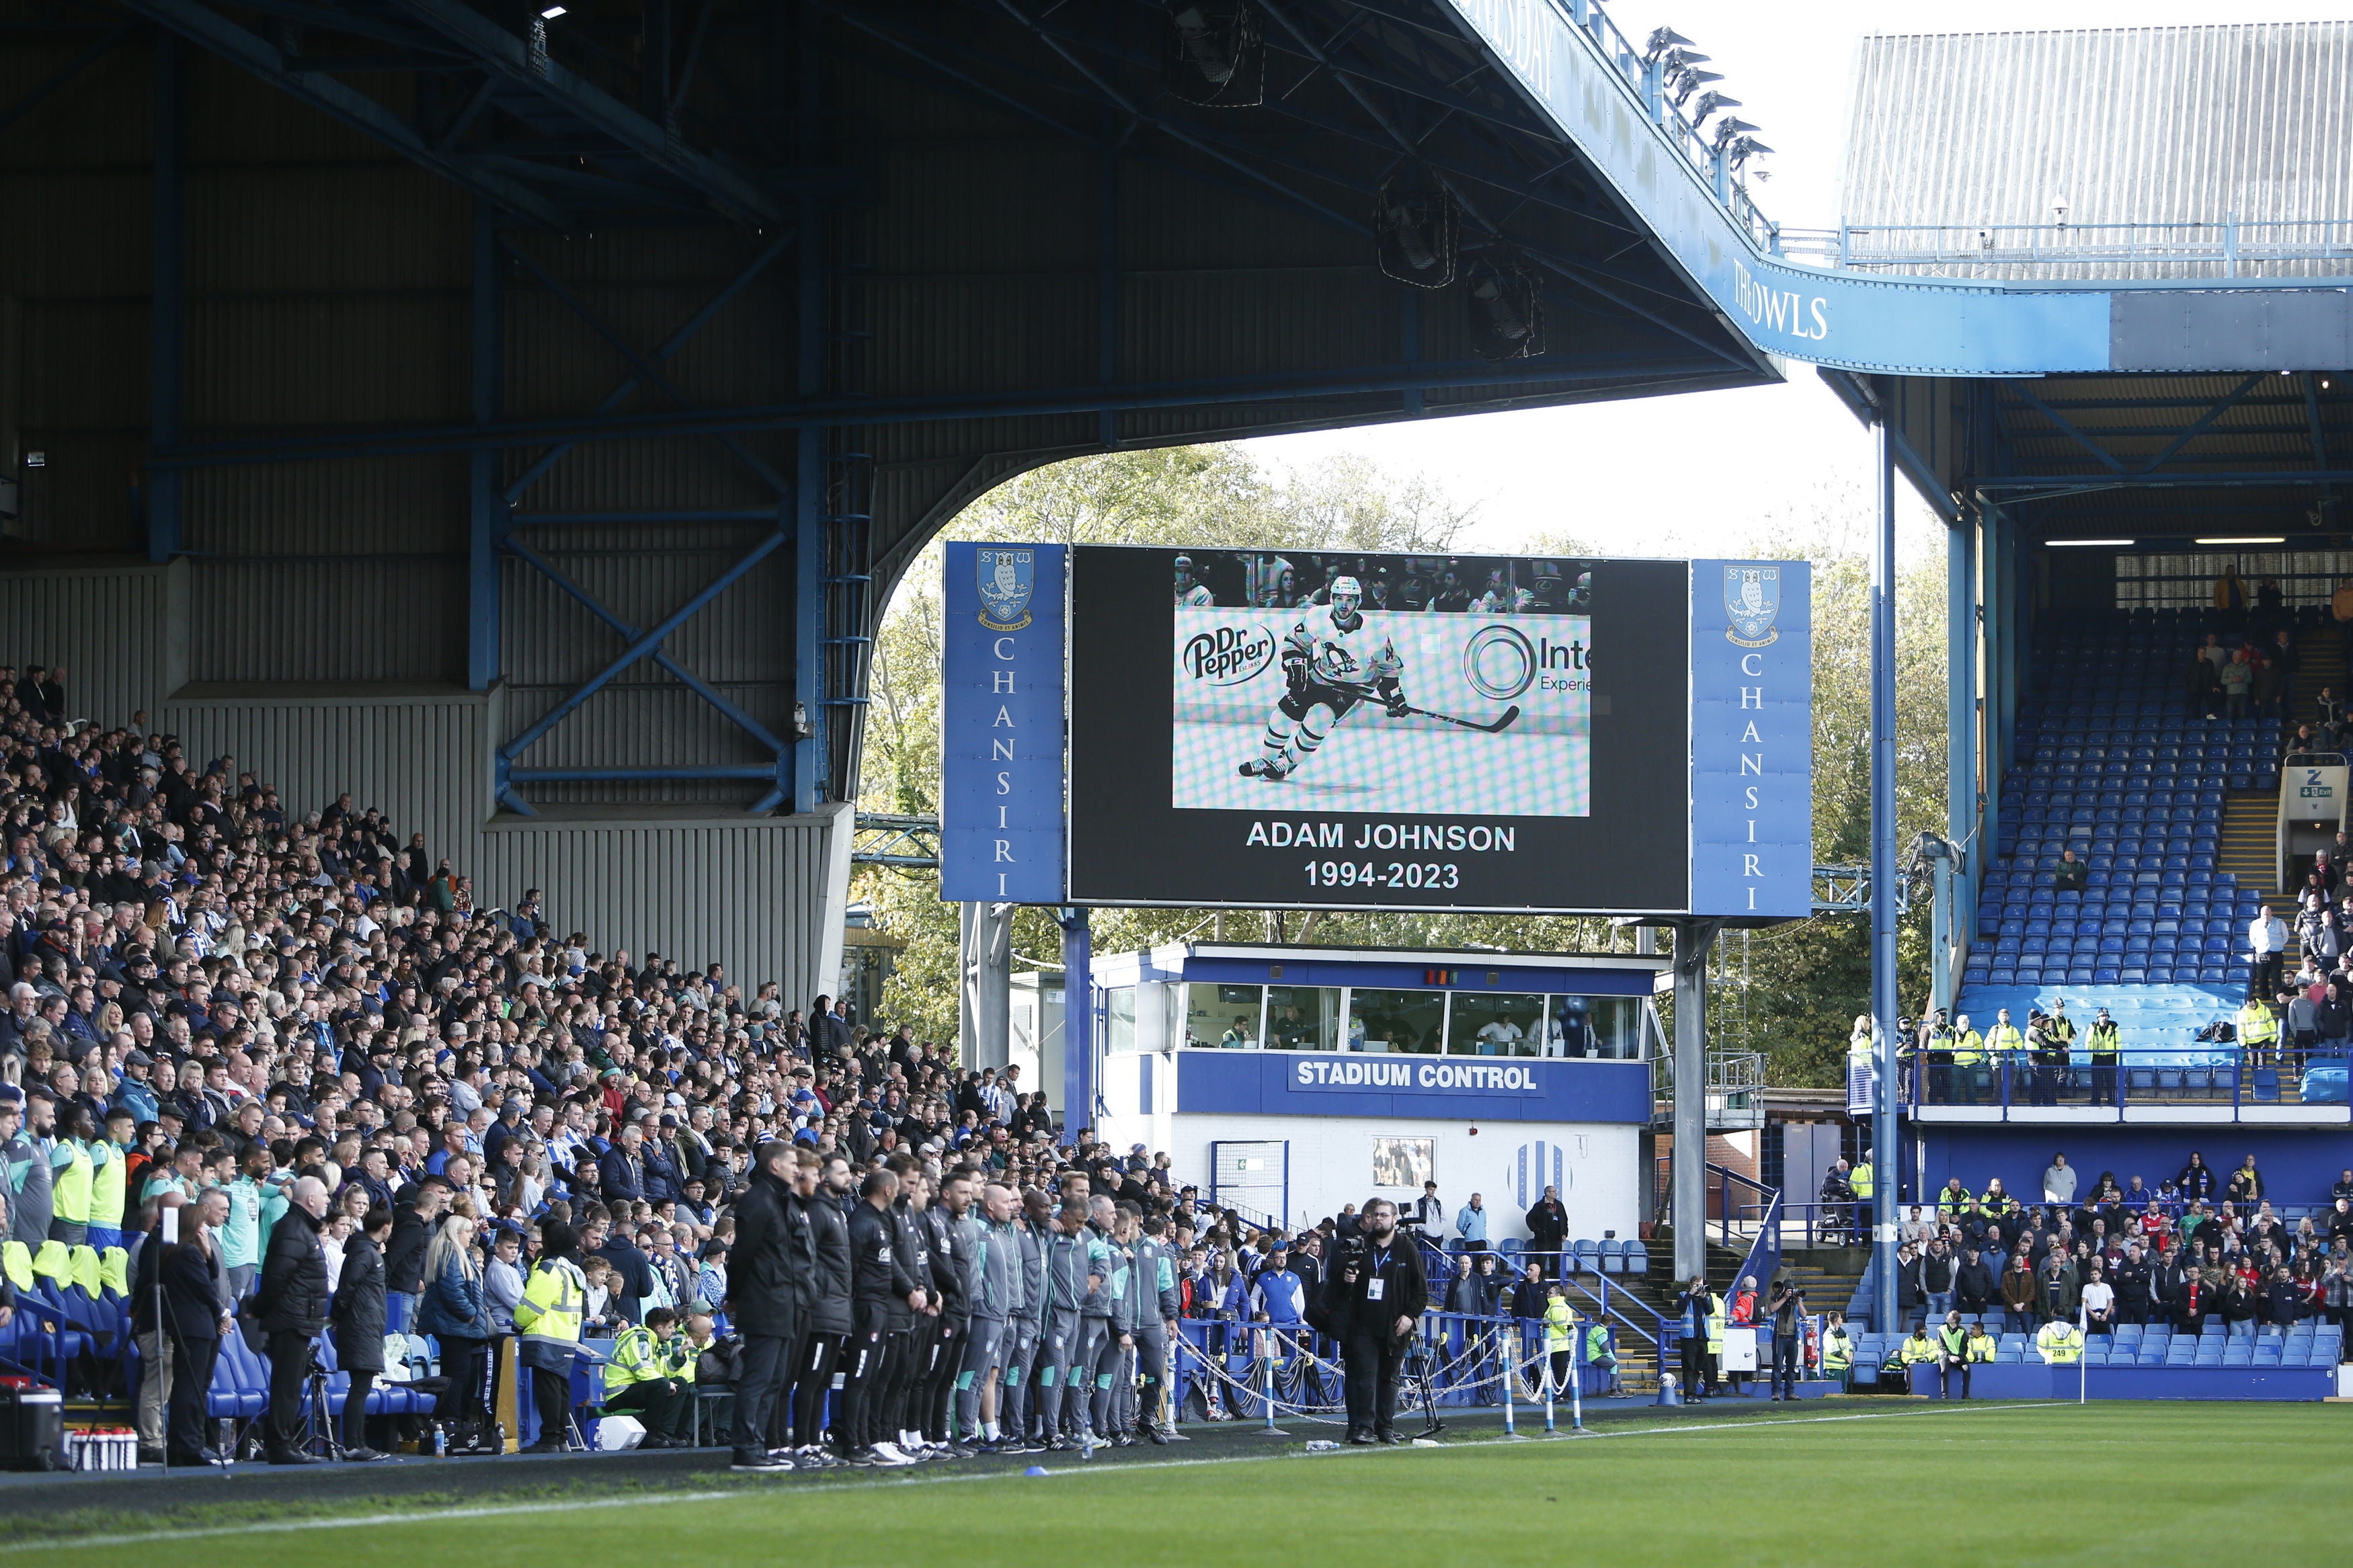 Players and staff observe a minute silence in memory of Adam Johnson ahead of the Sky Bet Championship match at Hillsborough